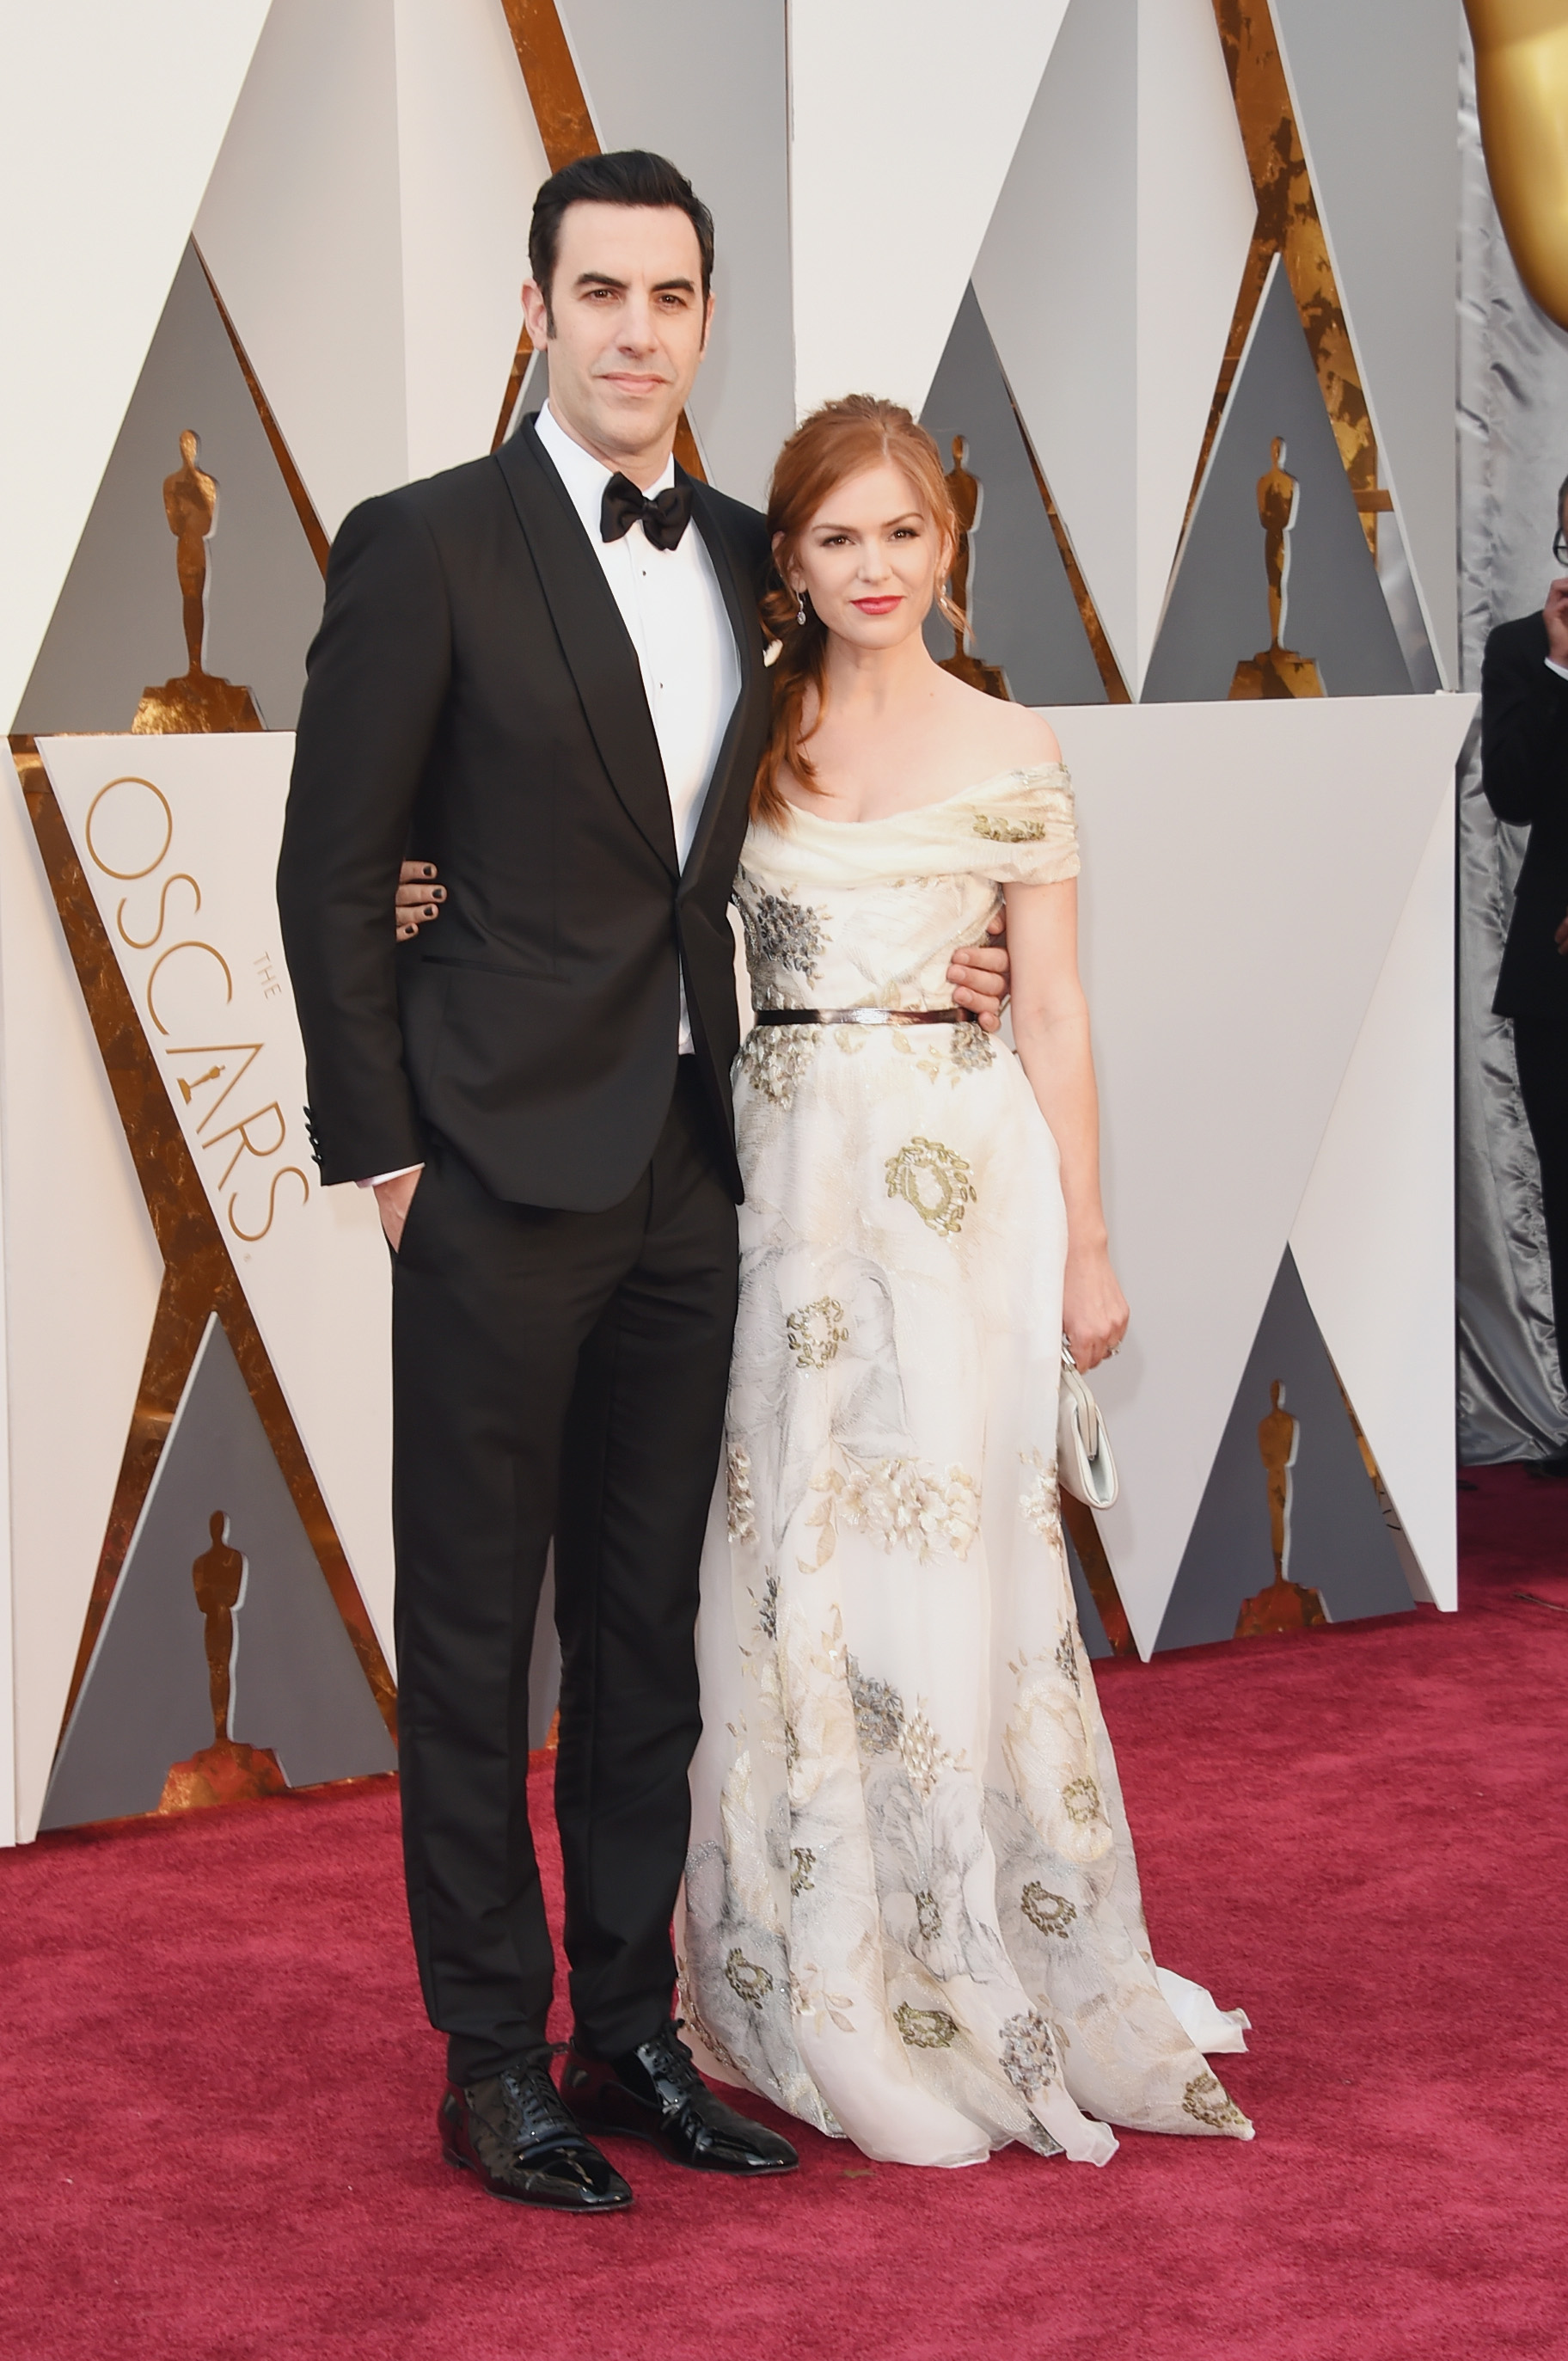 Sacha Baron Cohen and Isla Fisher attend the 88th Annual Academy Awards on Feb. 28, 2016 in Hollywood, Calif.